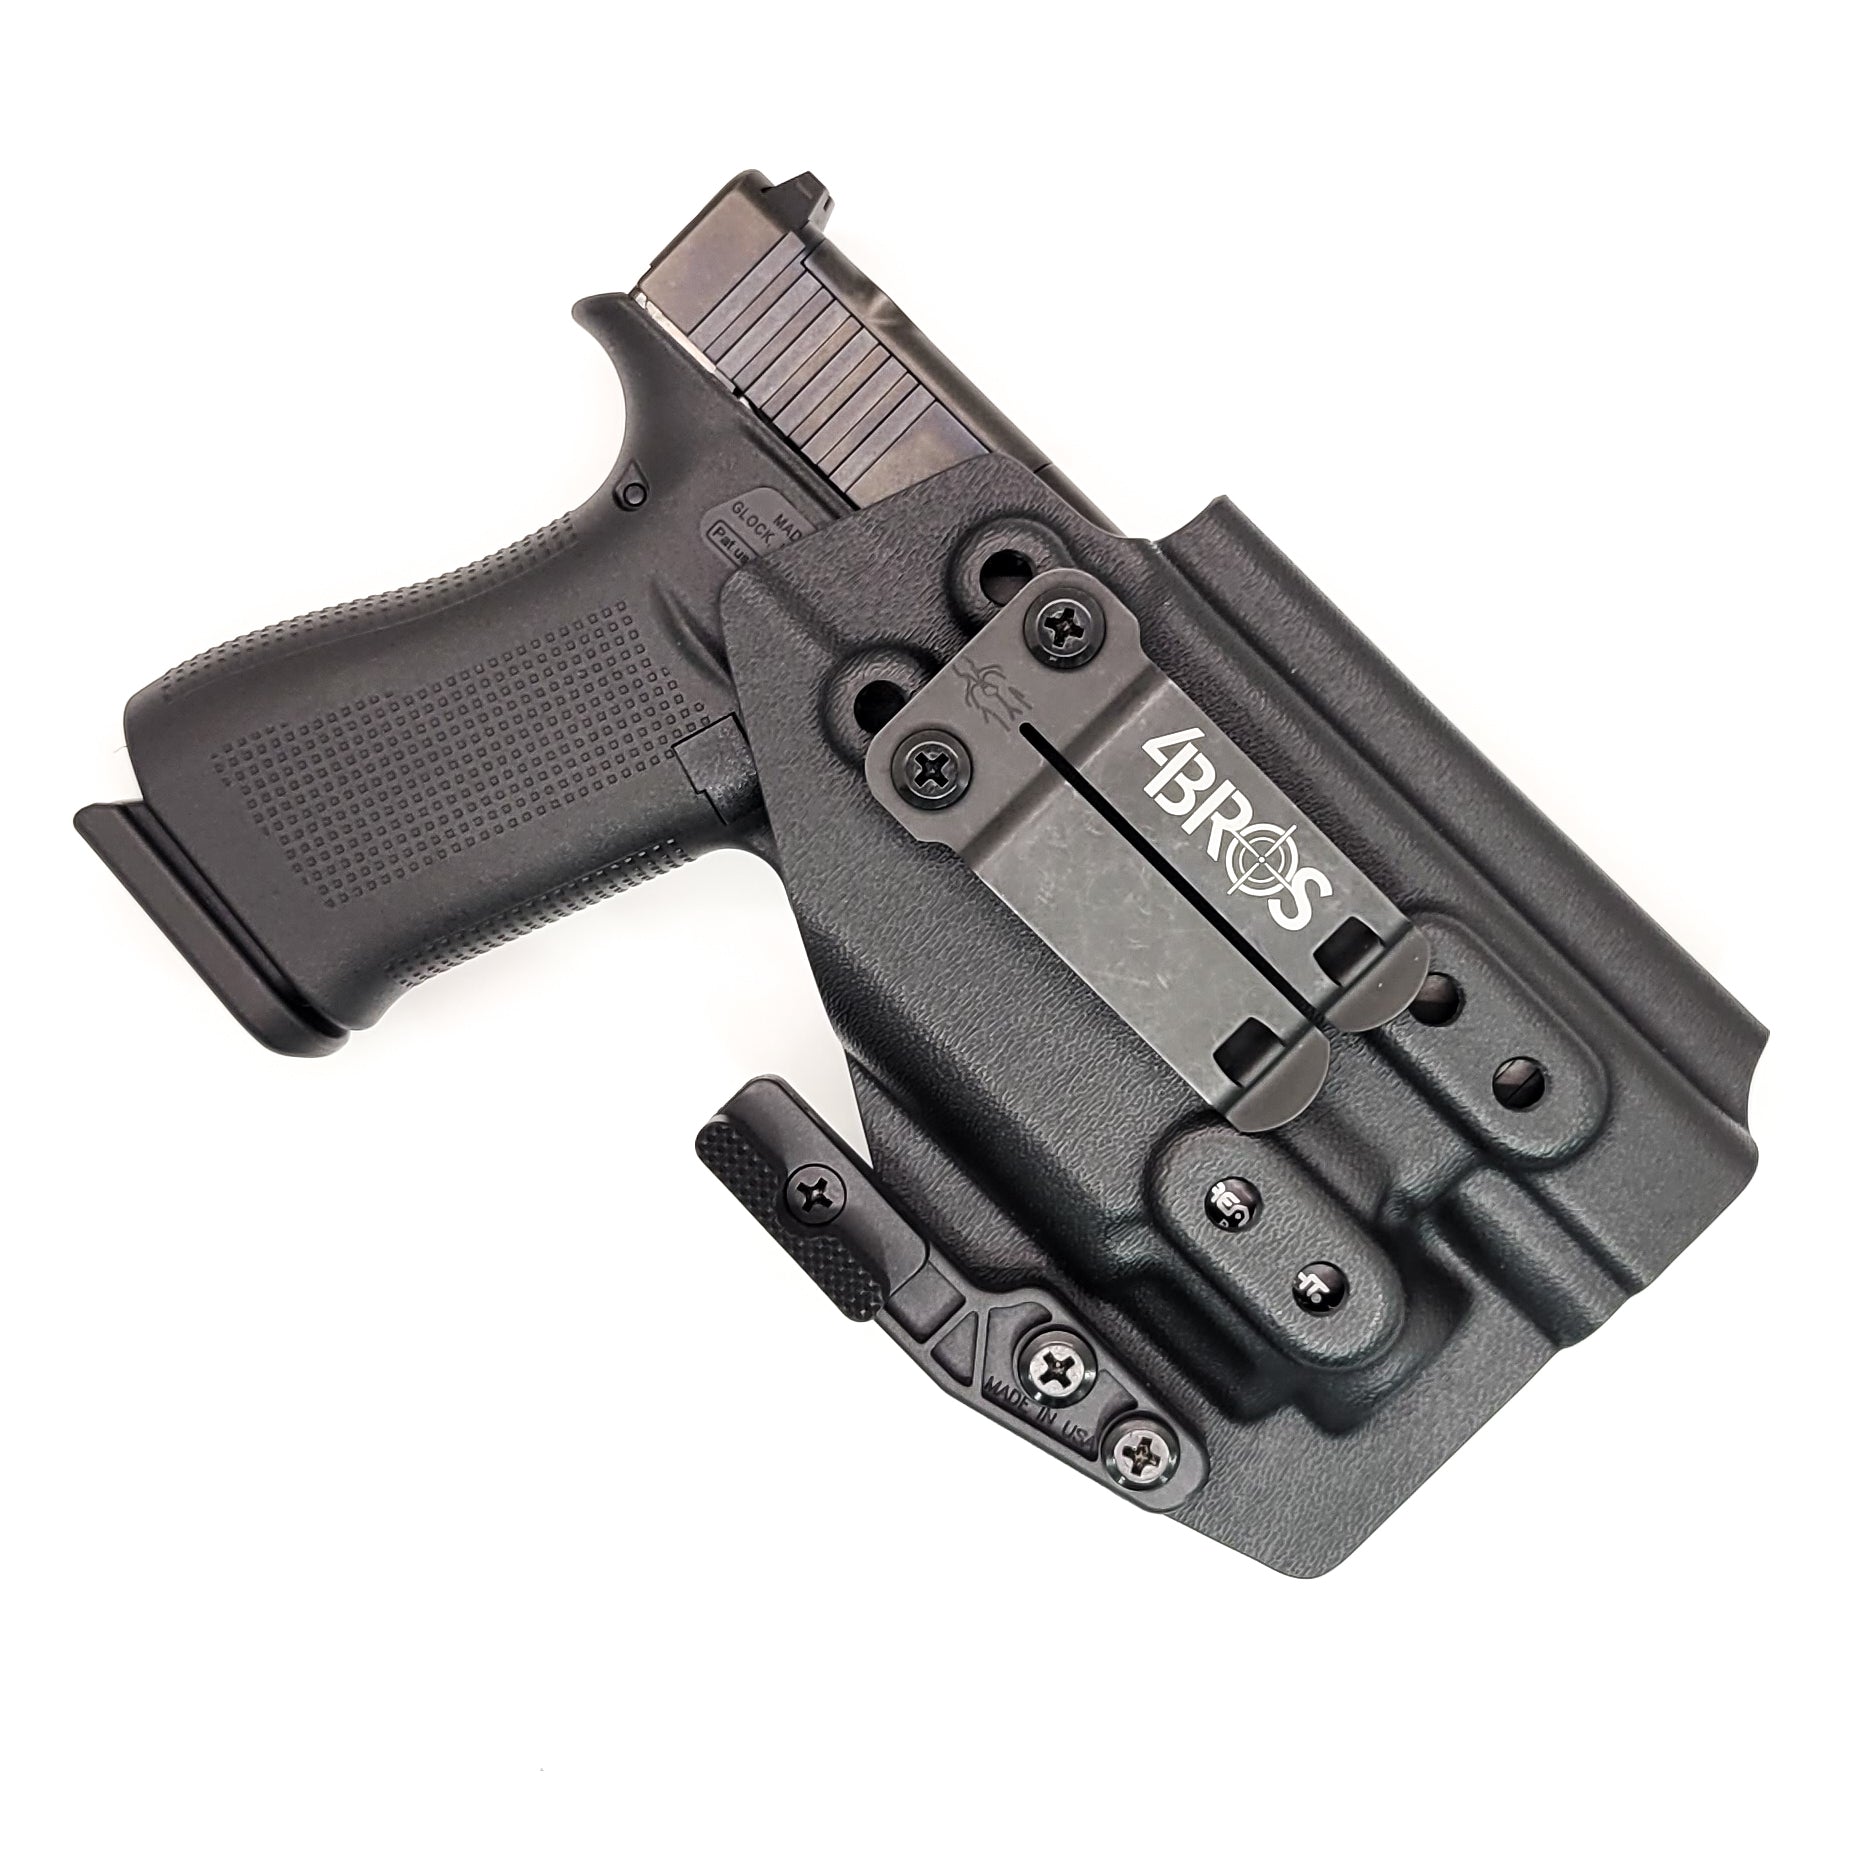 For the best Inside Waistband IWB AIWB Kydex Holster designed to fit the Glock 43X MOS, 48 MOS, 43X Rail, and 48 Rail pistols with Streamlight TLR-8 Sub, shop Four Brothers Holsters.  Full sweat guard, adjustable retention, smooth edges to reduce printing. Made in the USA. Open muzzle and cleared for red dot sights.